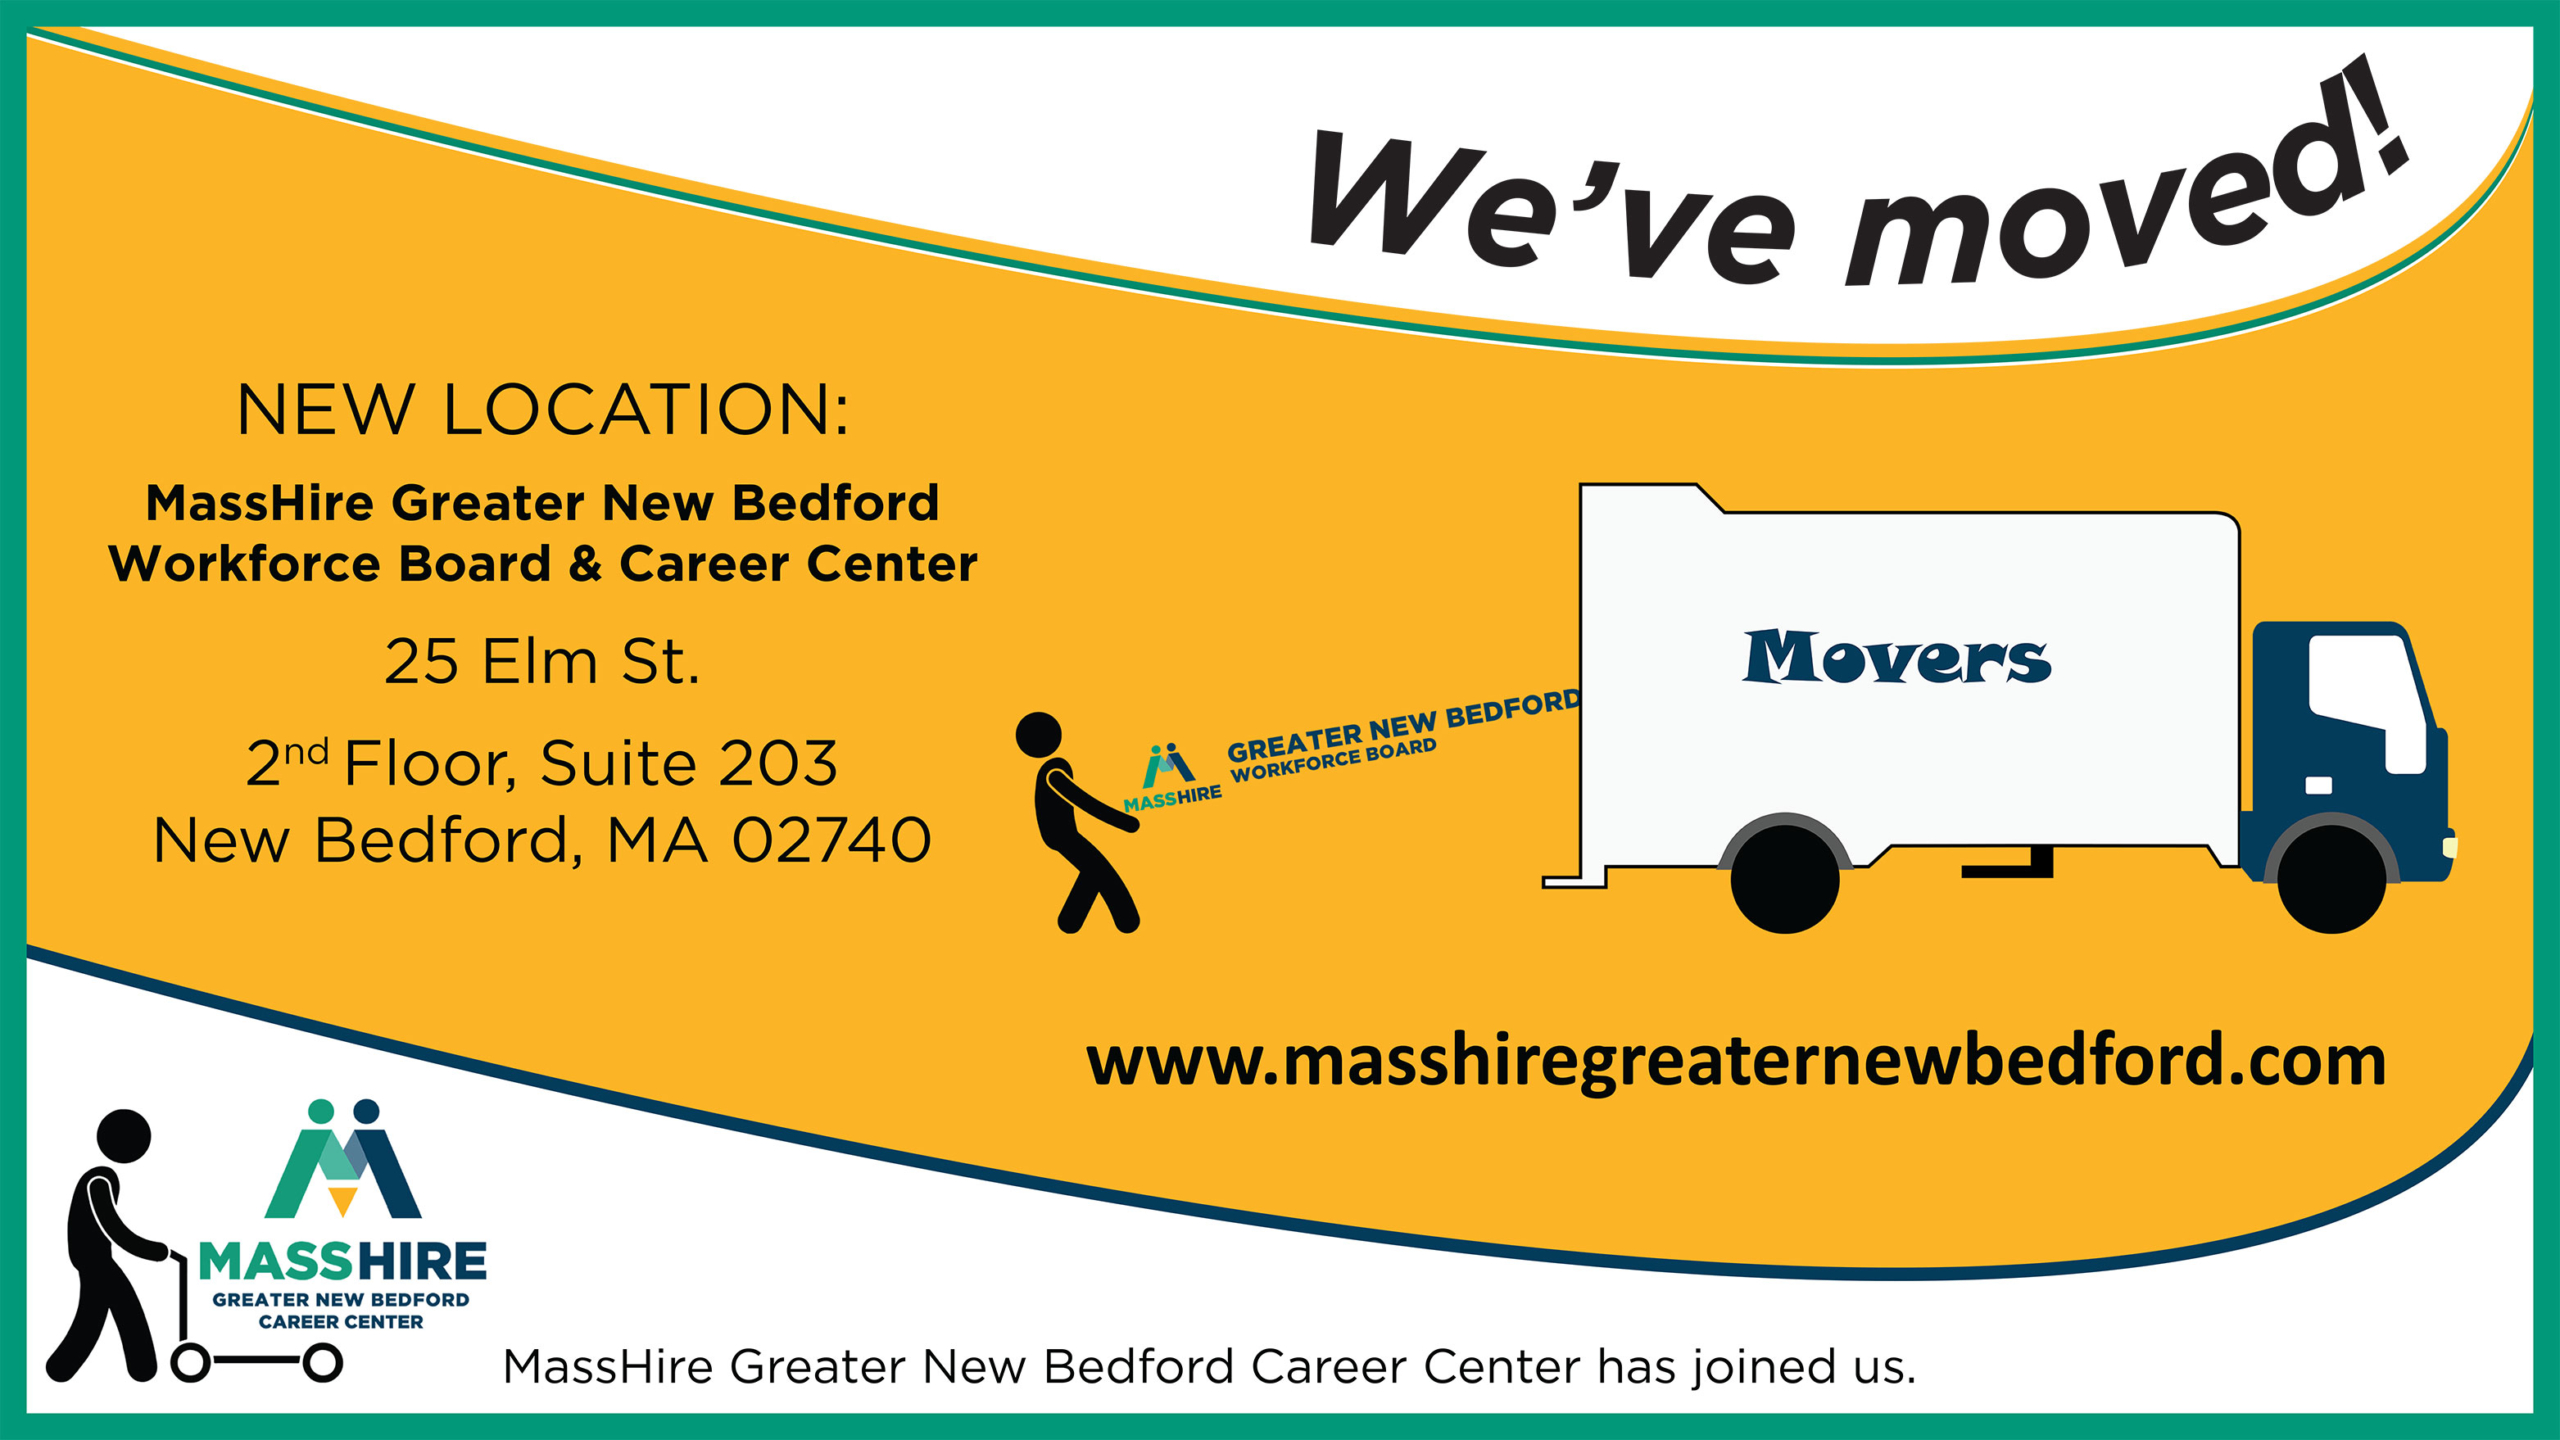 We have moved to 25 Elm Street, New Bedford, MA 02740